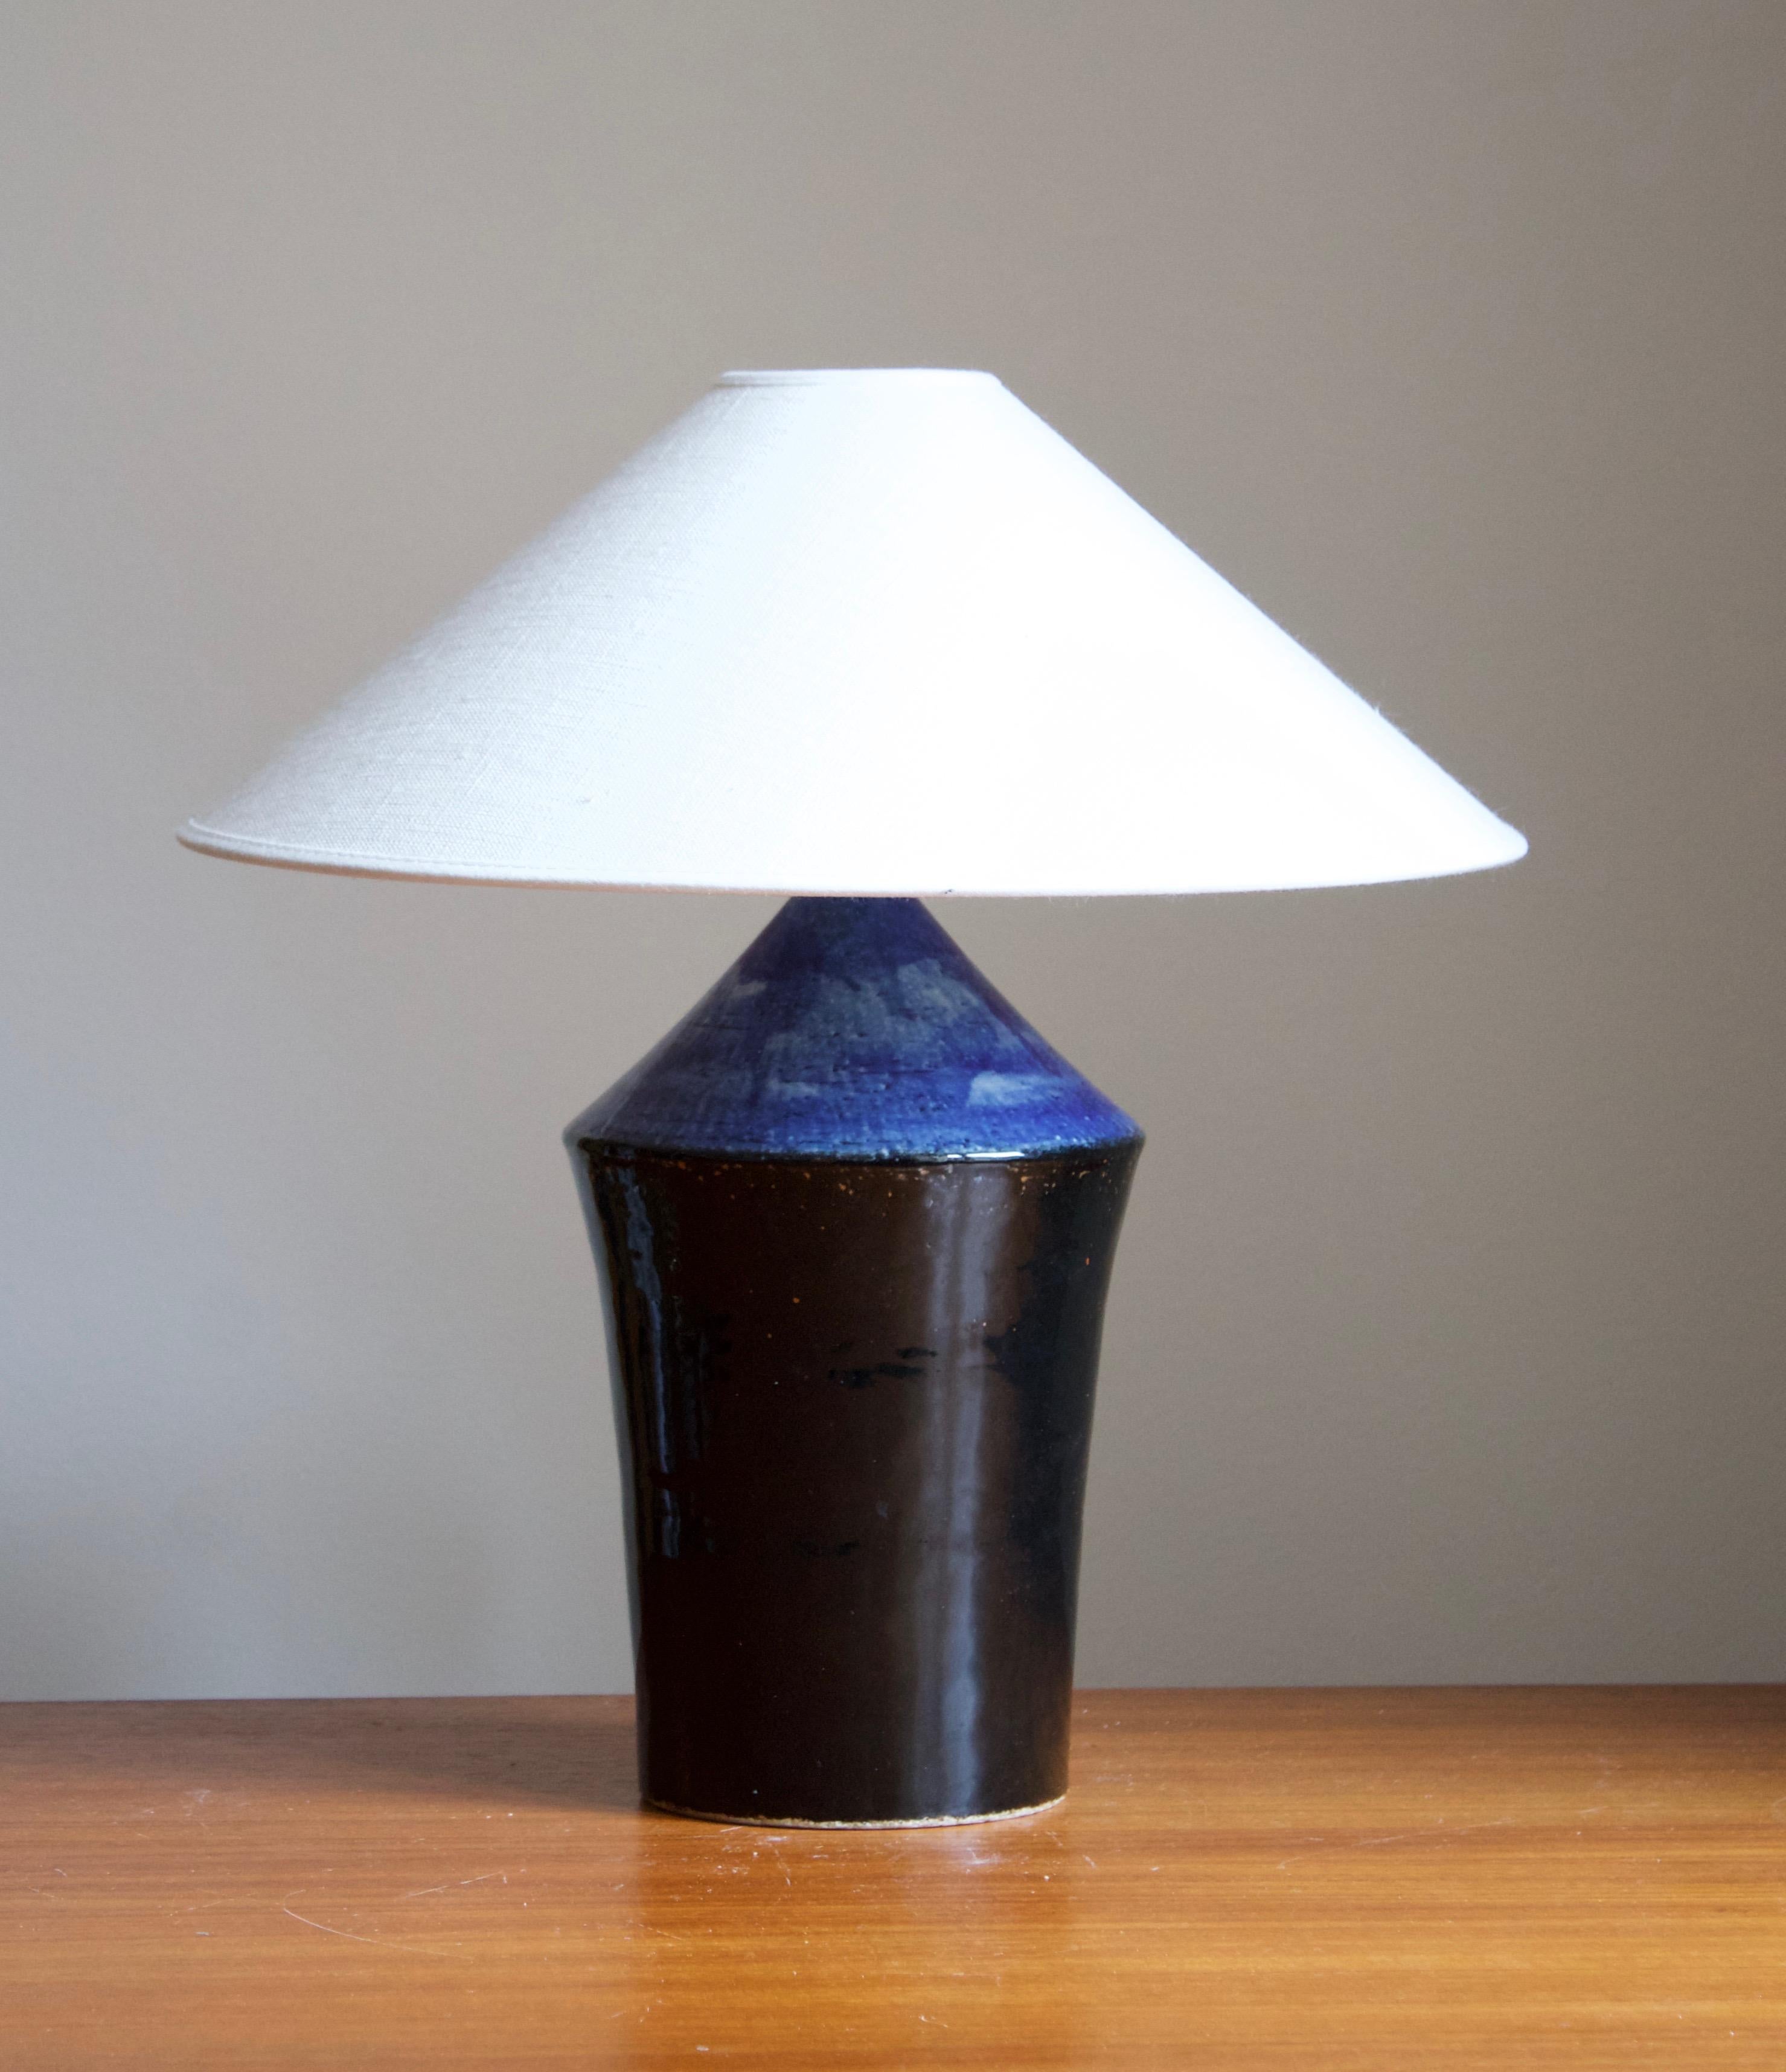 A rare stoneware table lamp designed by Sylvia Leuchovius, produced by Rörstrands, signed and dated 1979. From the rare production at Rörstands named 